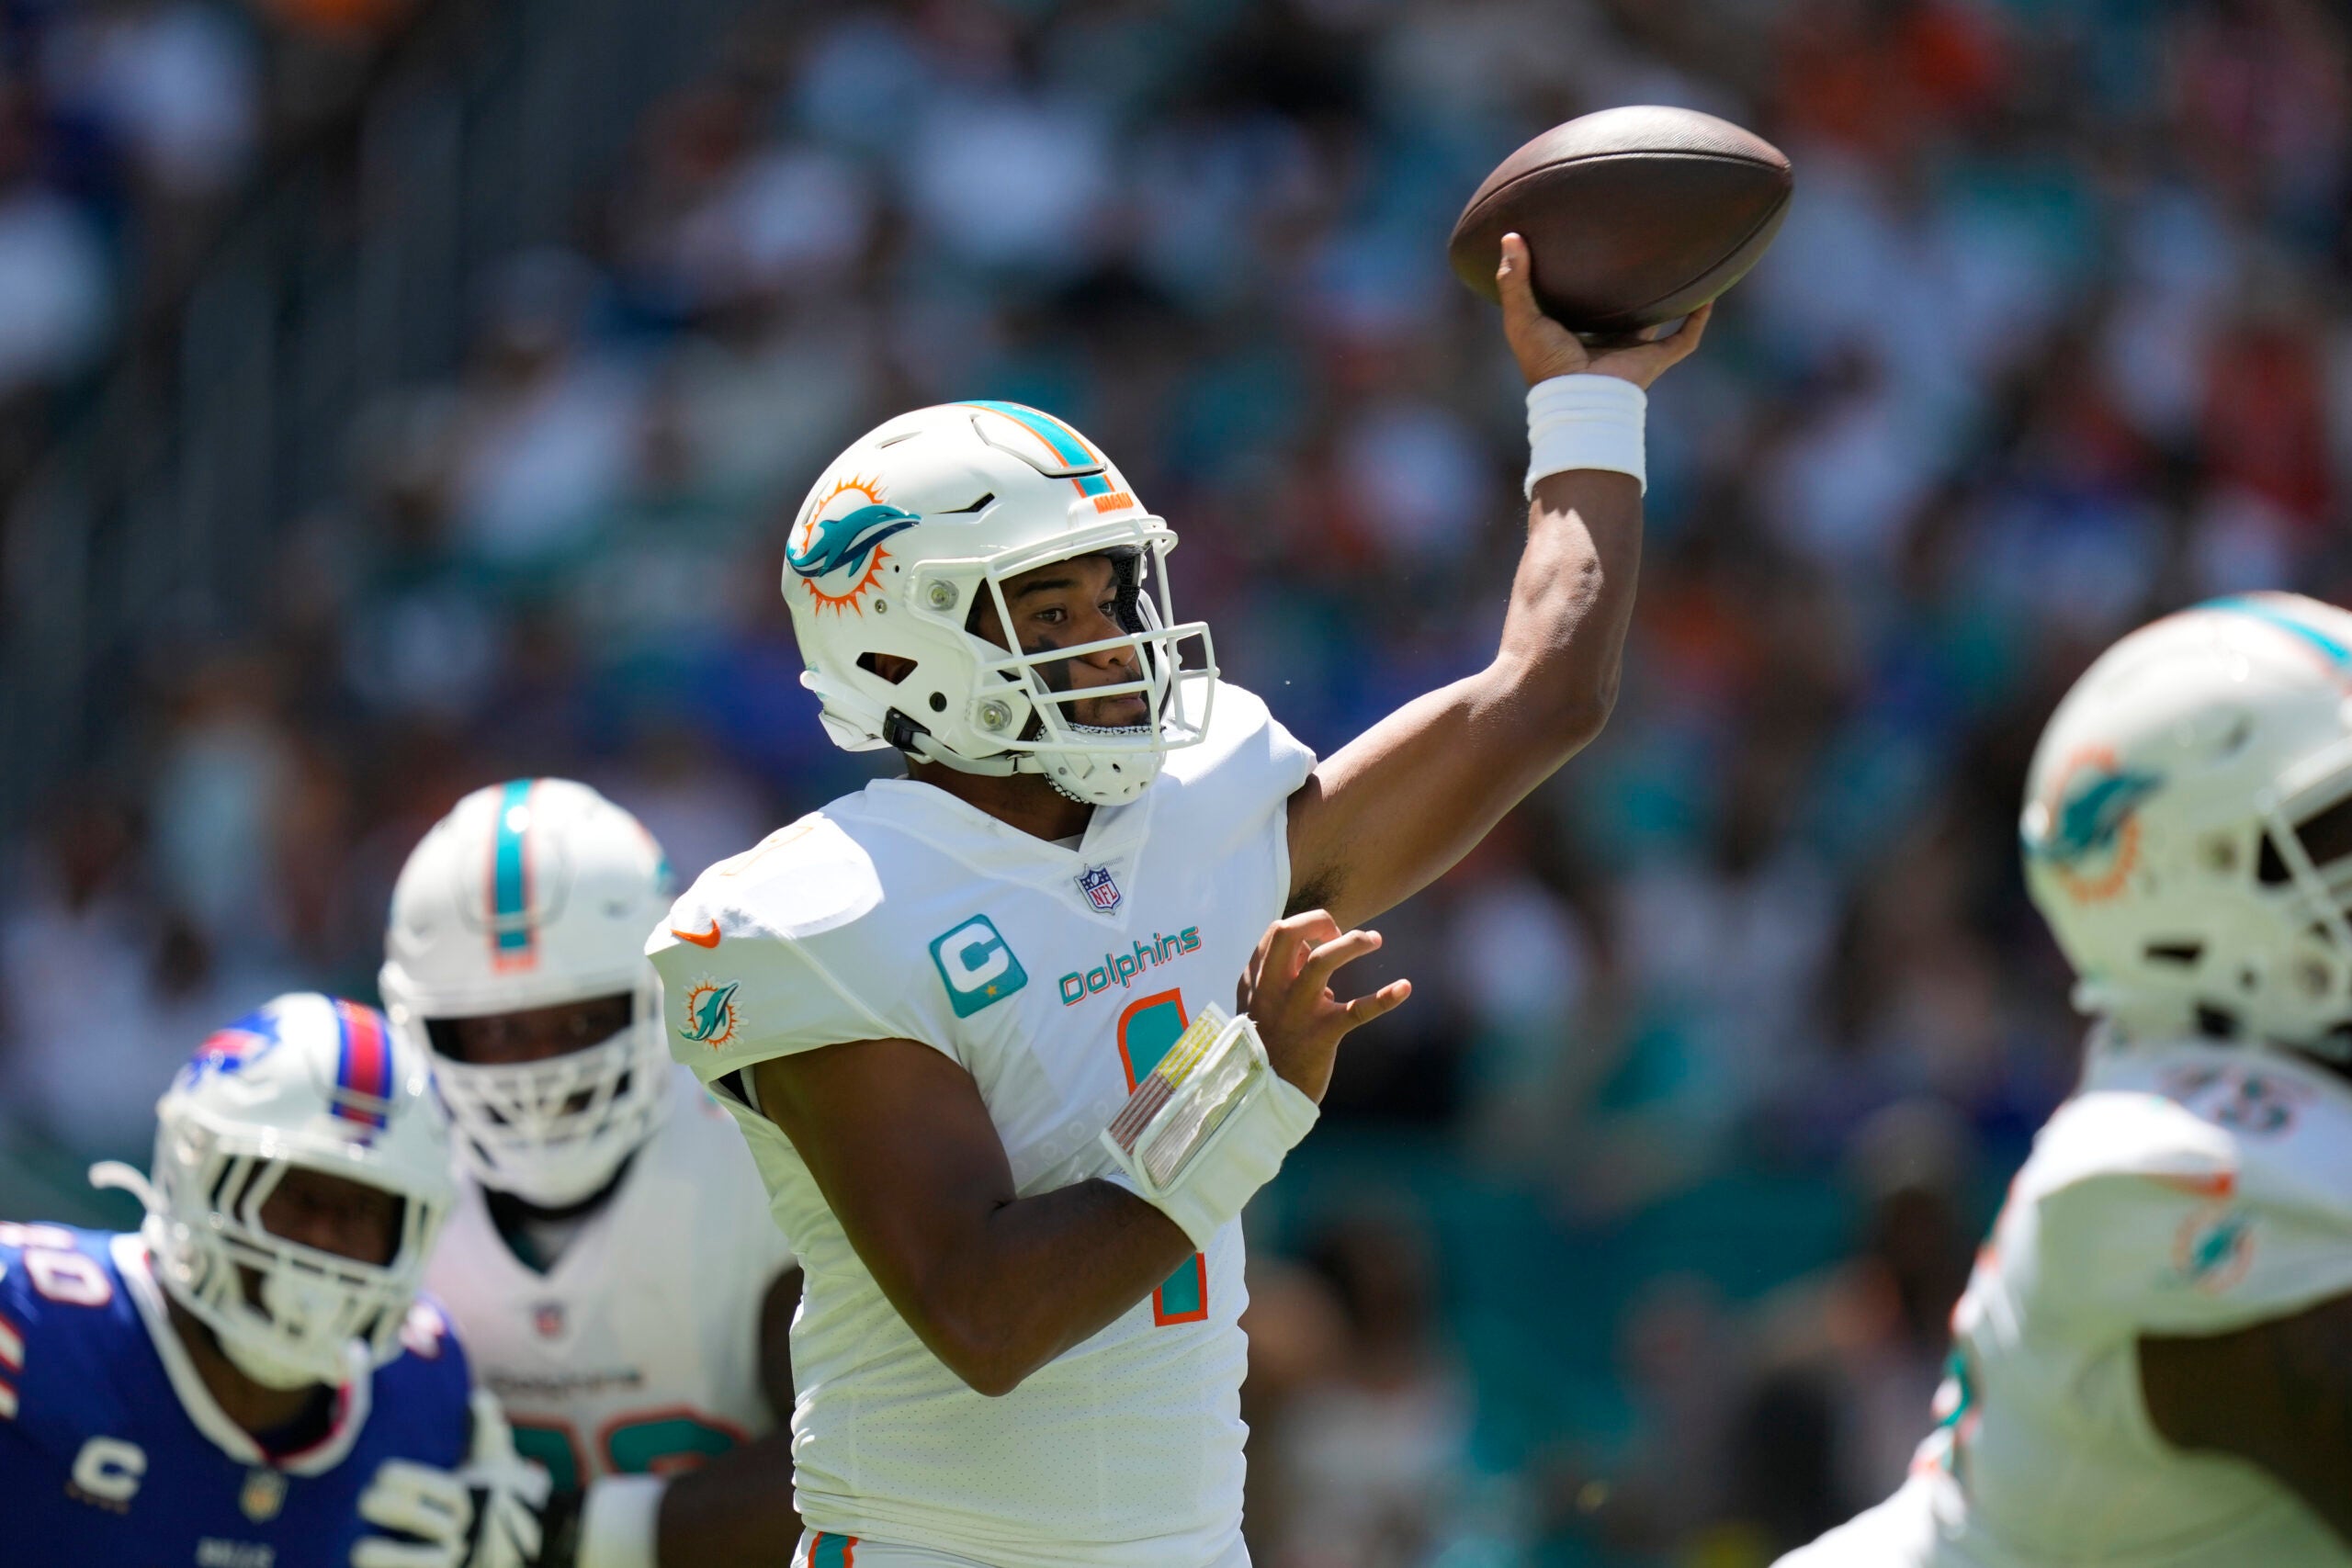 Miami Dolphins quarterback Tua Tagovailoa (1) aims a pass during the first half of an NFL football game against the Buffalo Bills, Sunday, Sept. 25, 2022, in Miami Gardens.